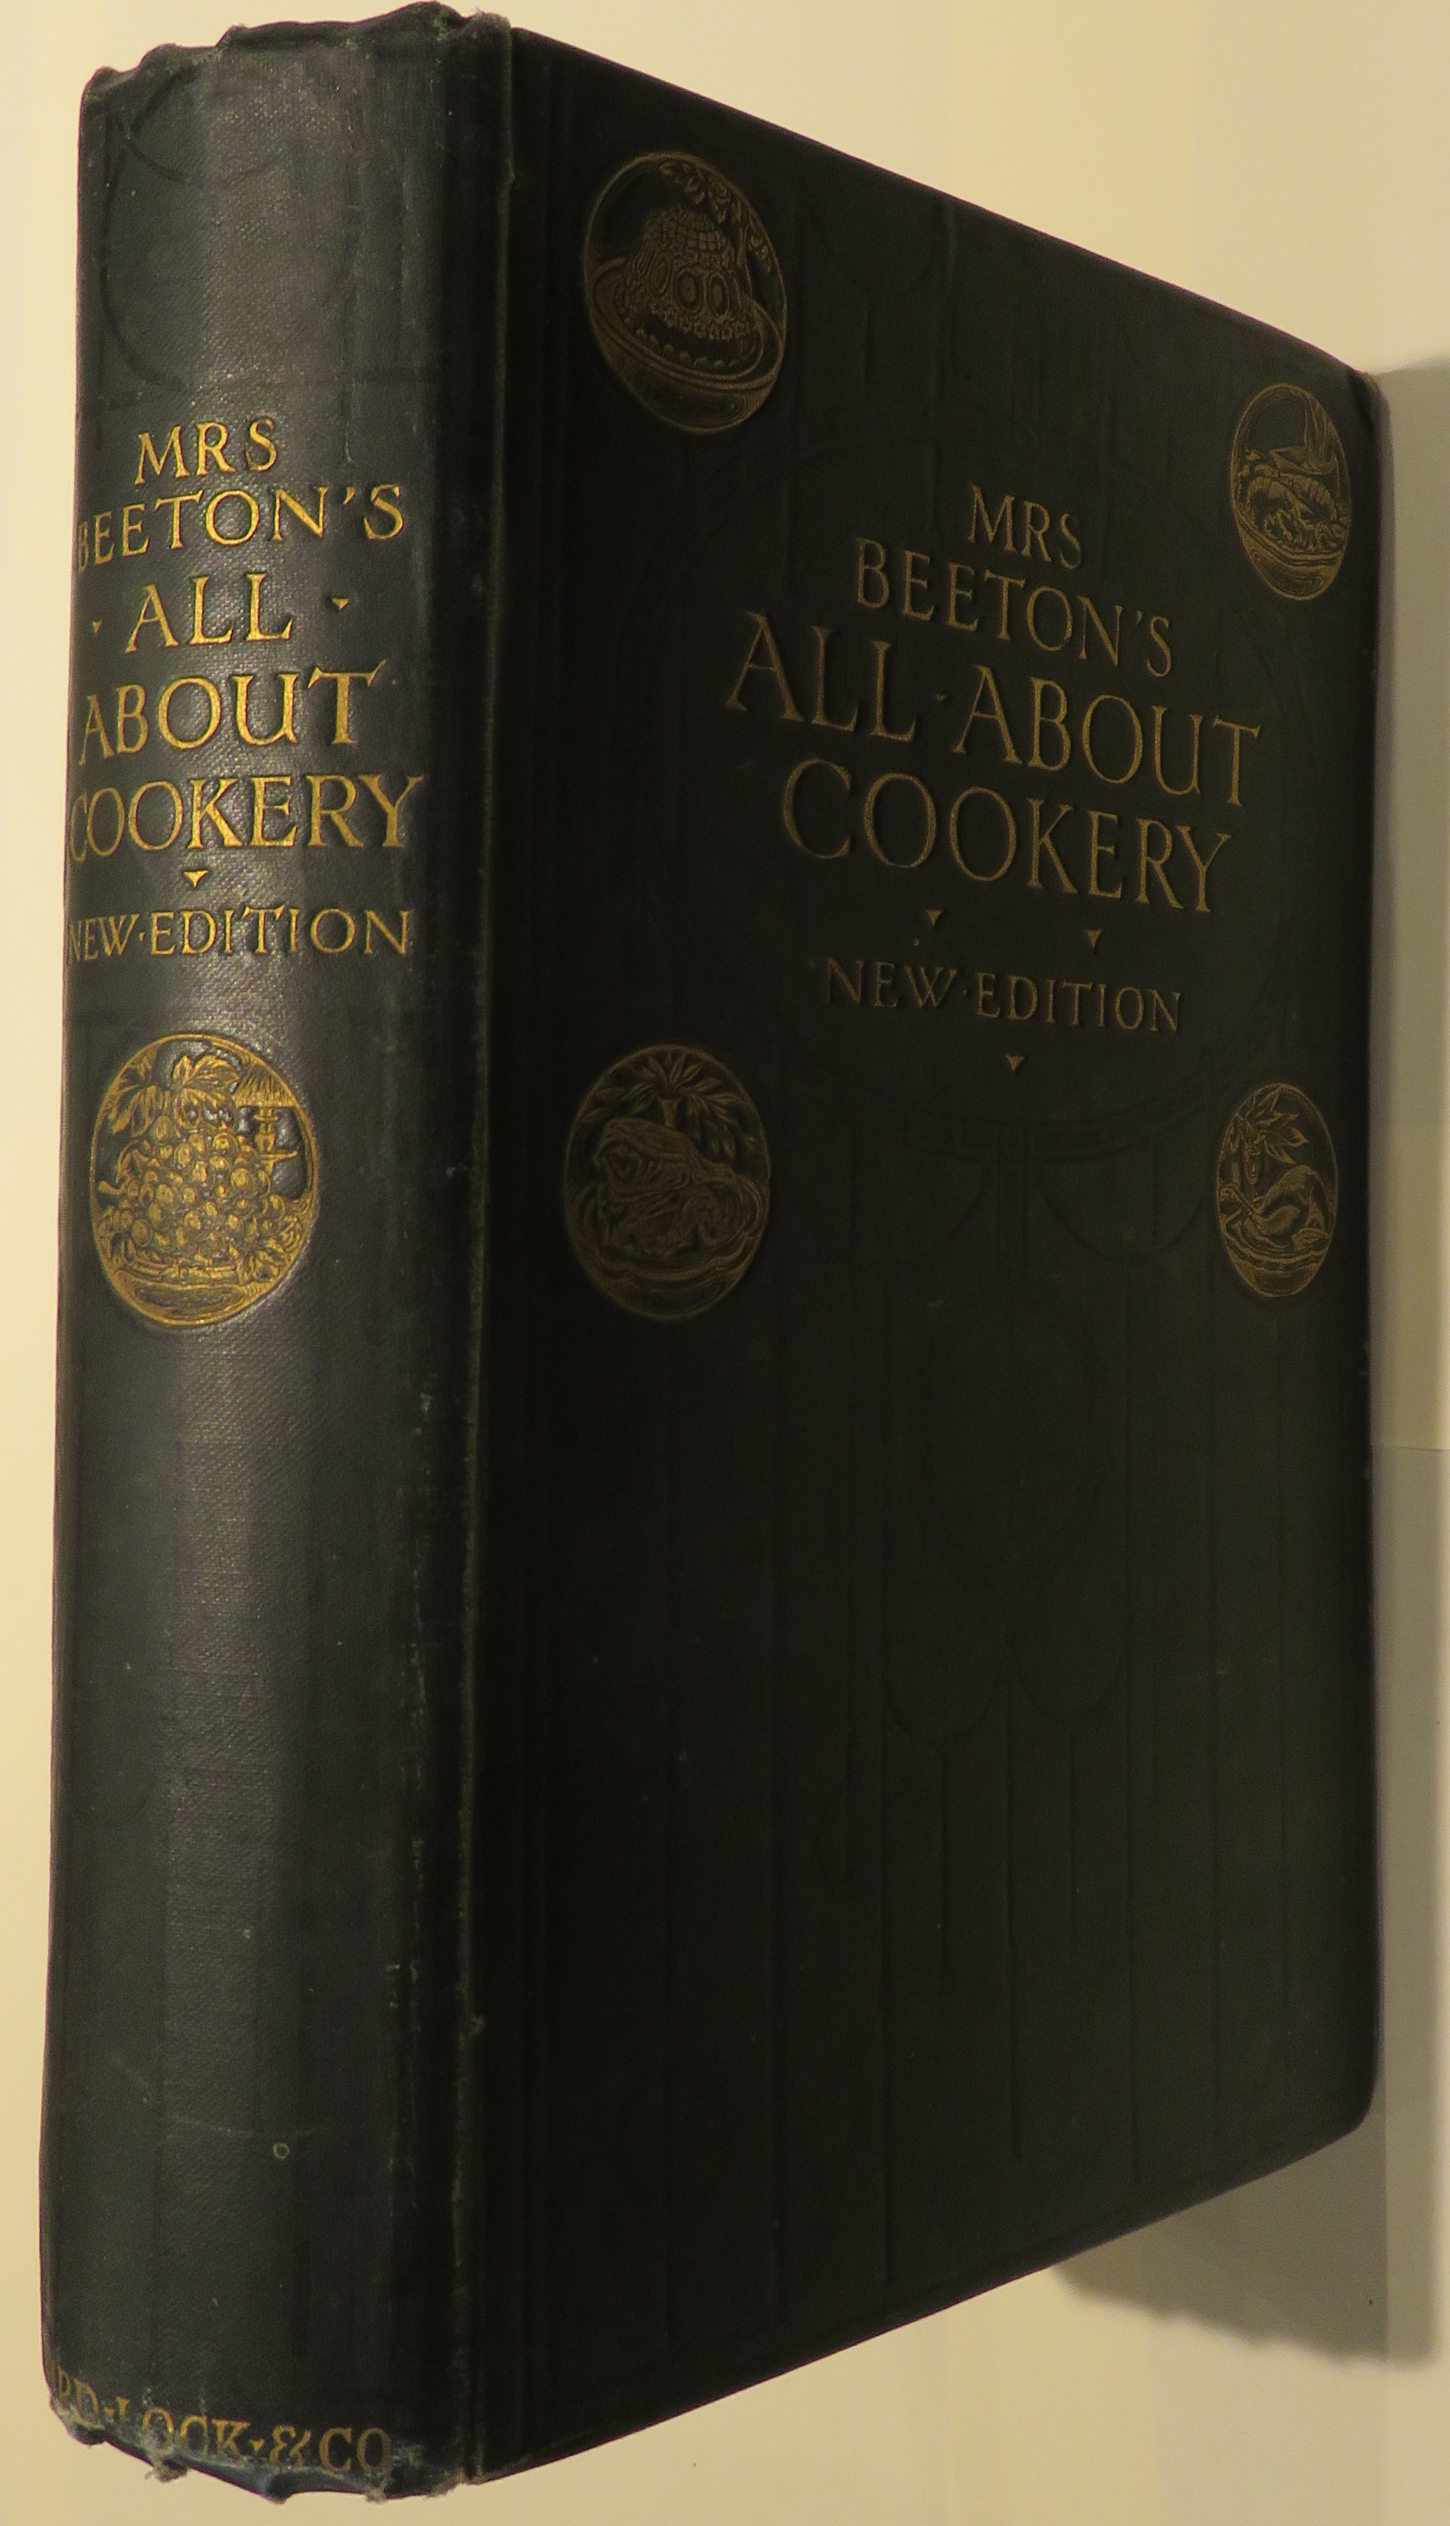 Mrs Beeton's All About Cookery New Edition 1907